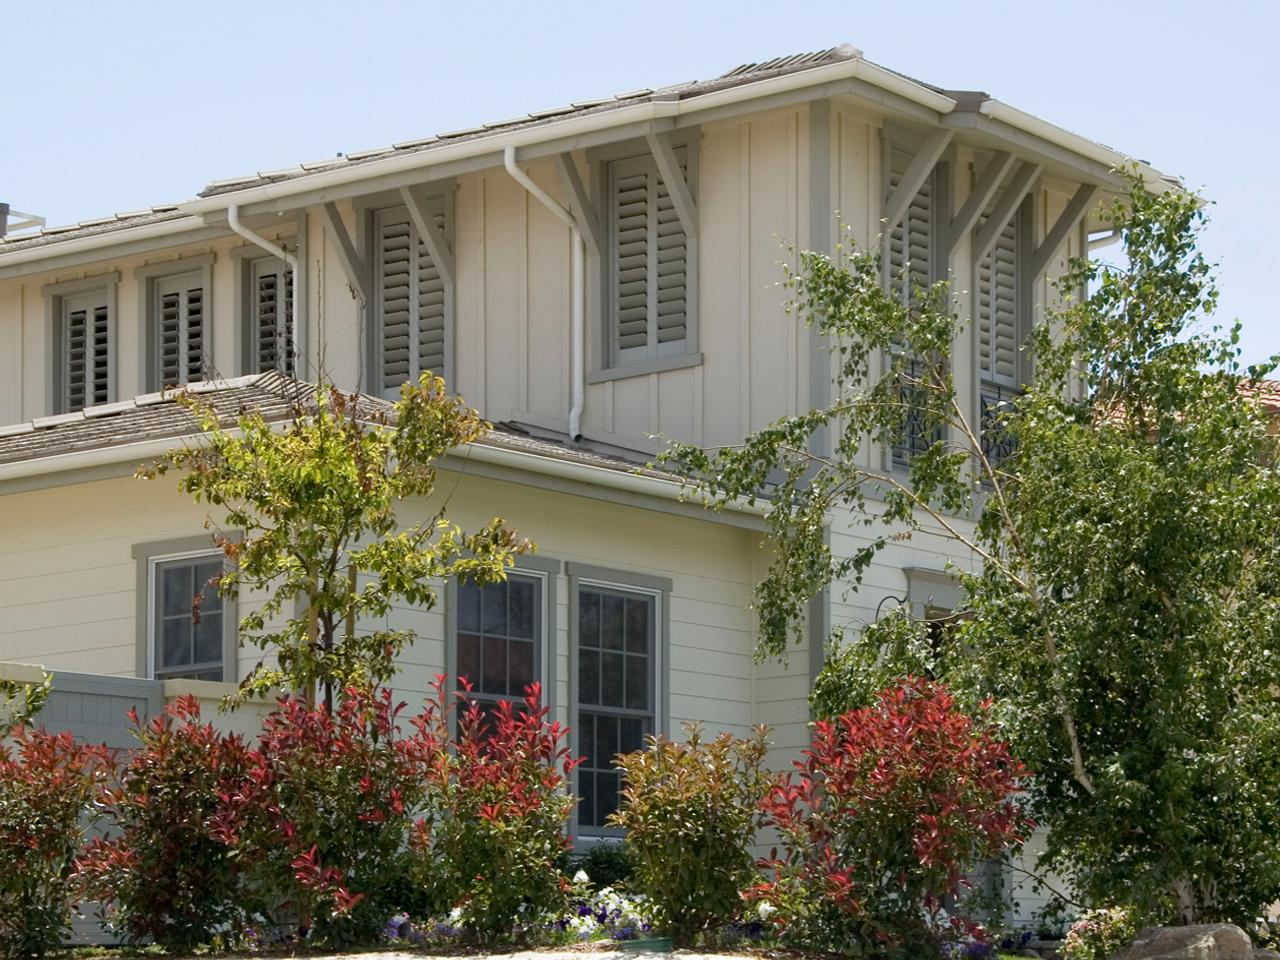 Outside view of home with interior shutters